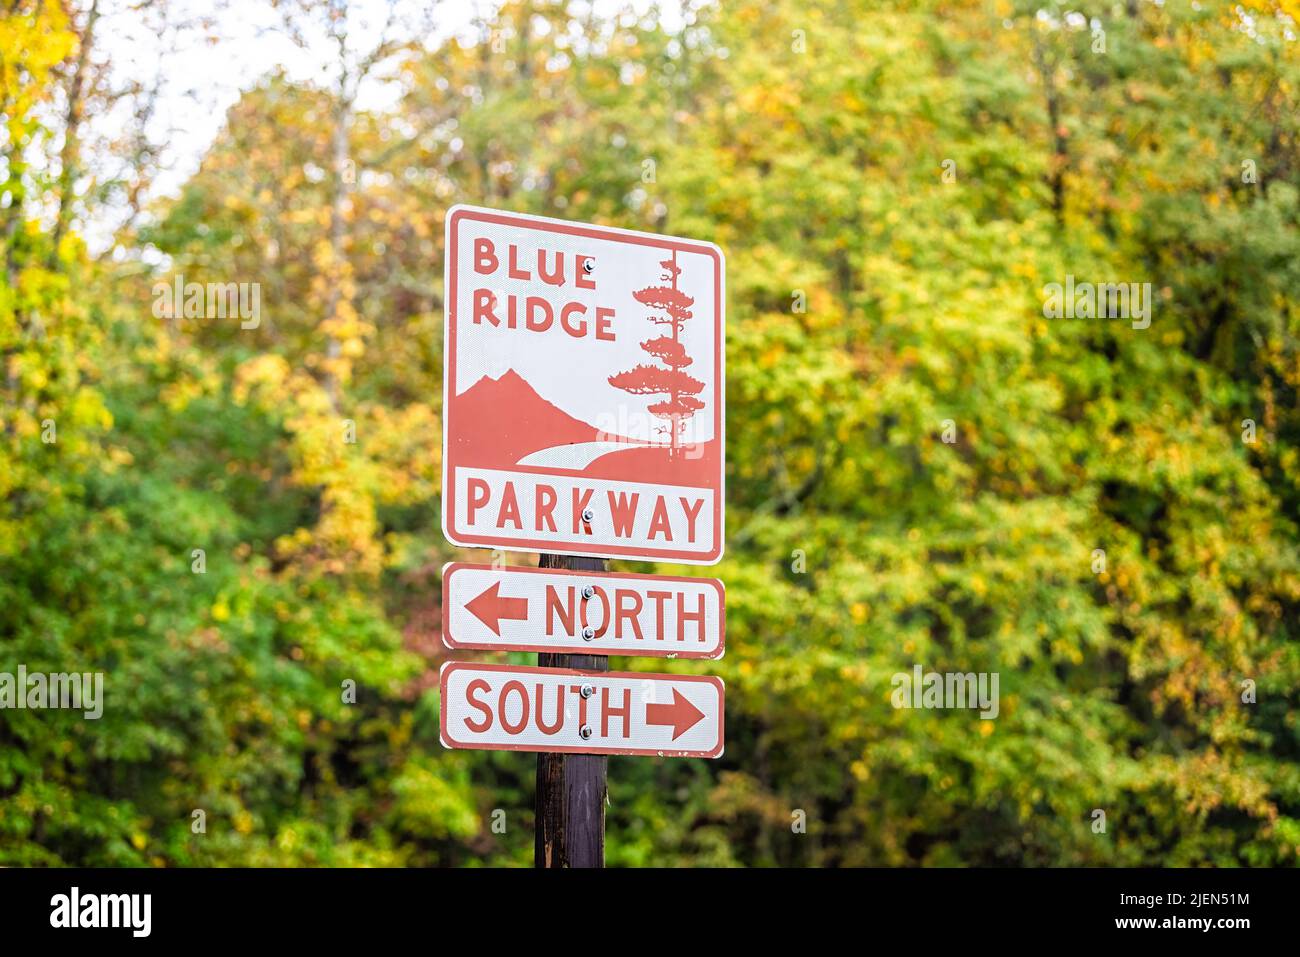 Laurel Springs, USA - October 6, 2021: Blue Ridge mountains national park in autumn fall with yellow green foliage on trees and sign for parkway road Stock Photo